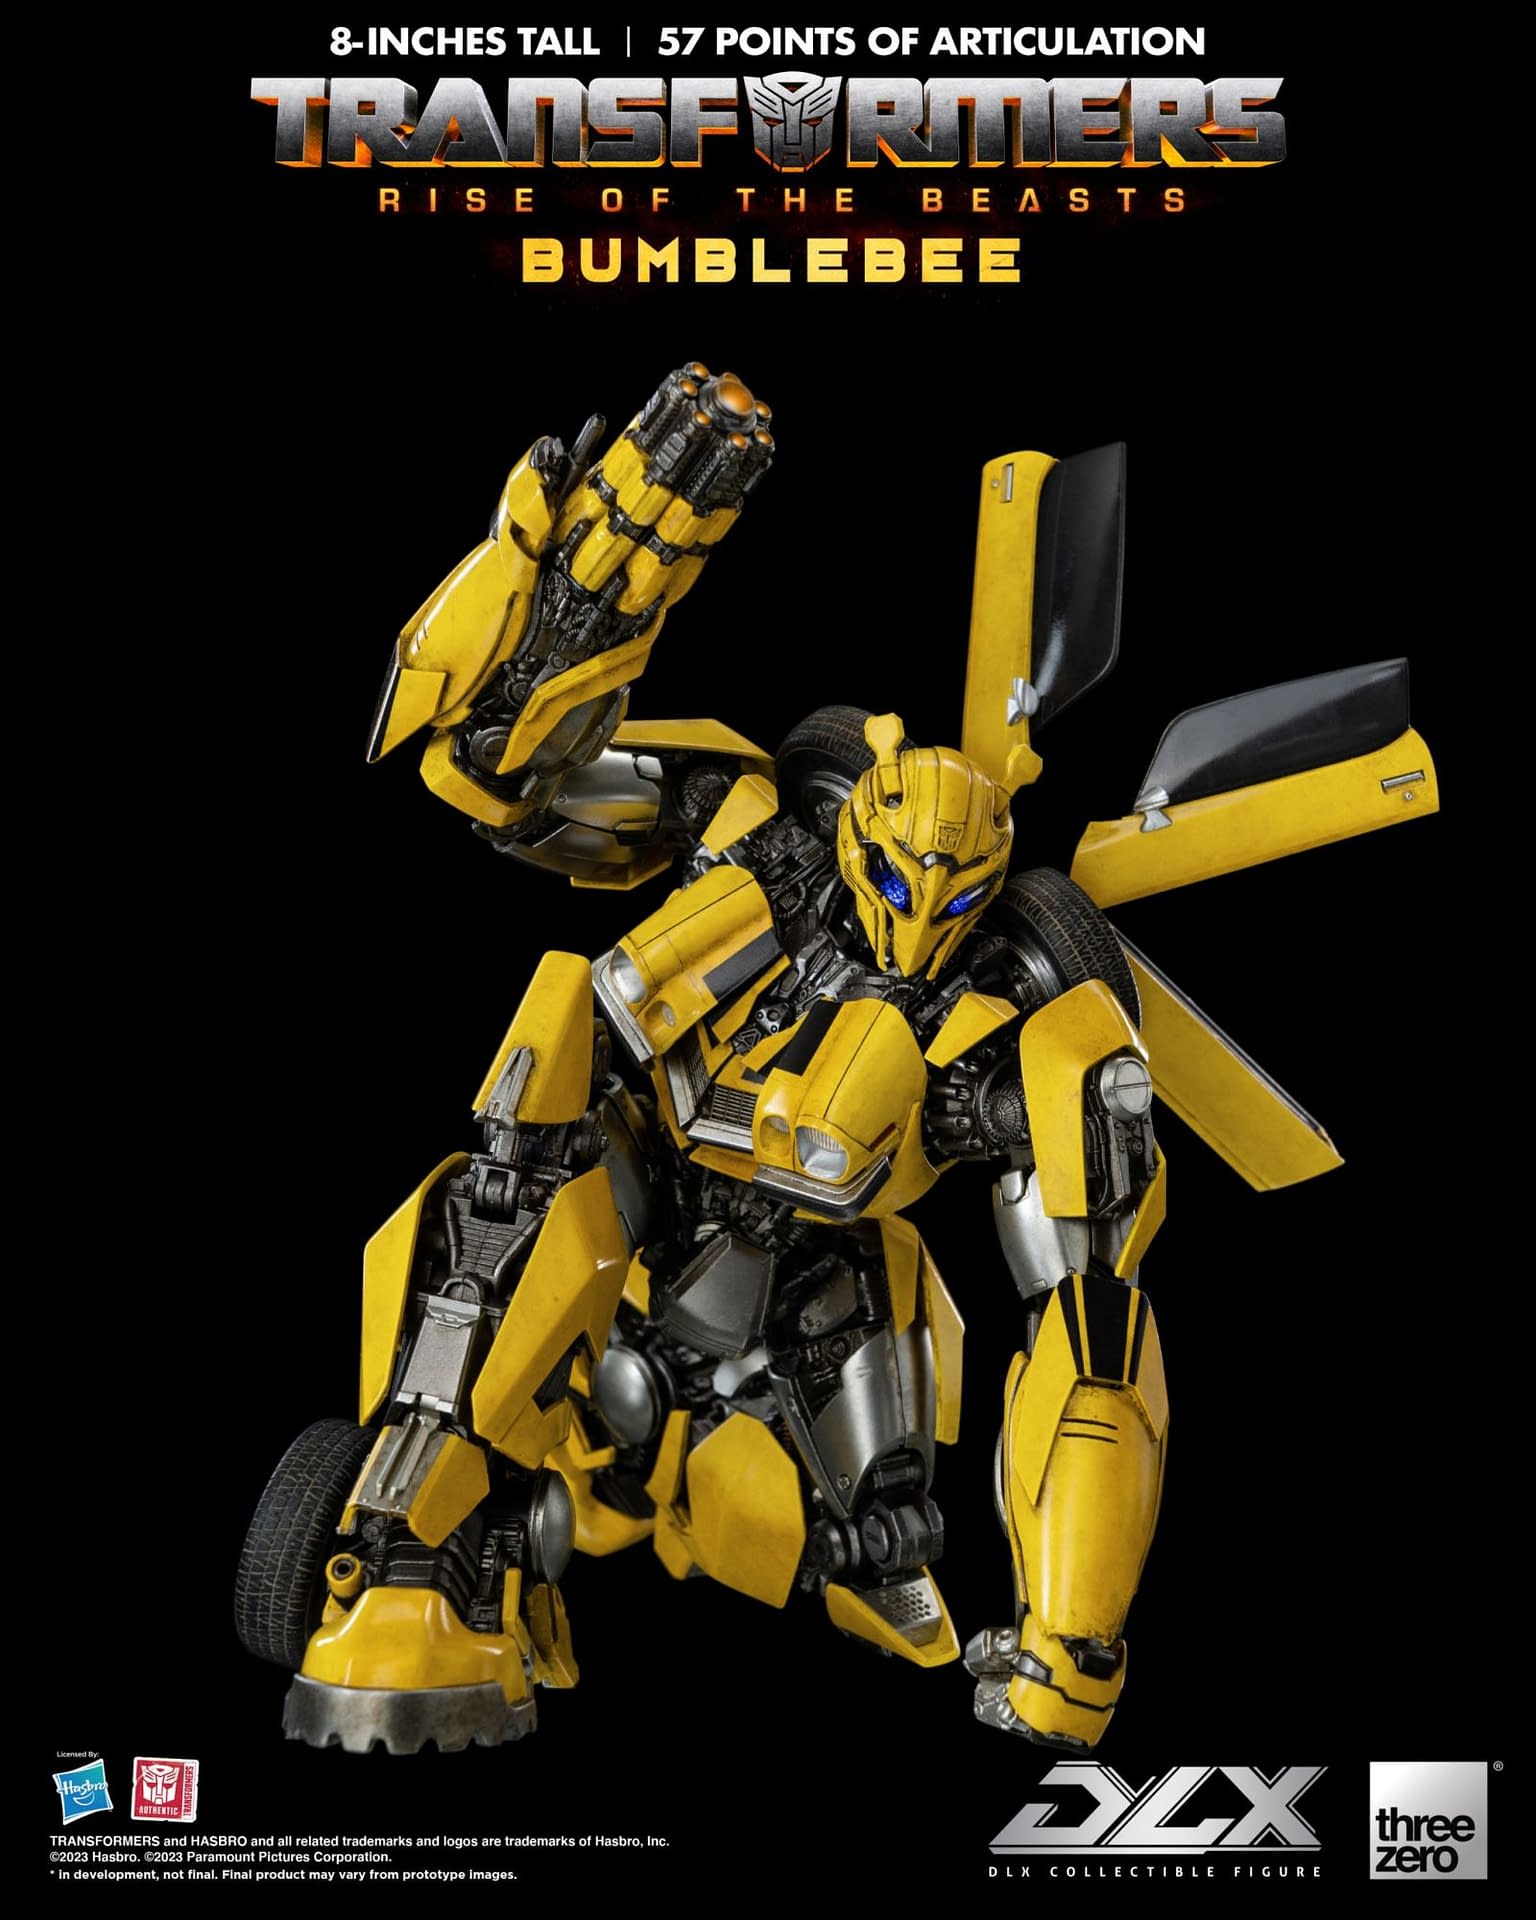 Transformers: Rise of the Beasts Bumblebee DLX Arrives from threezero